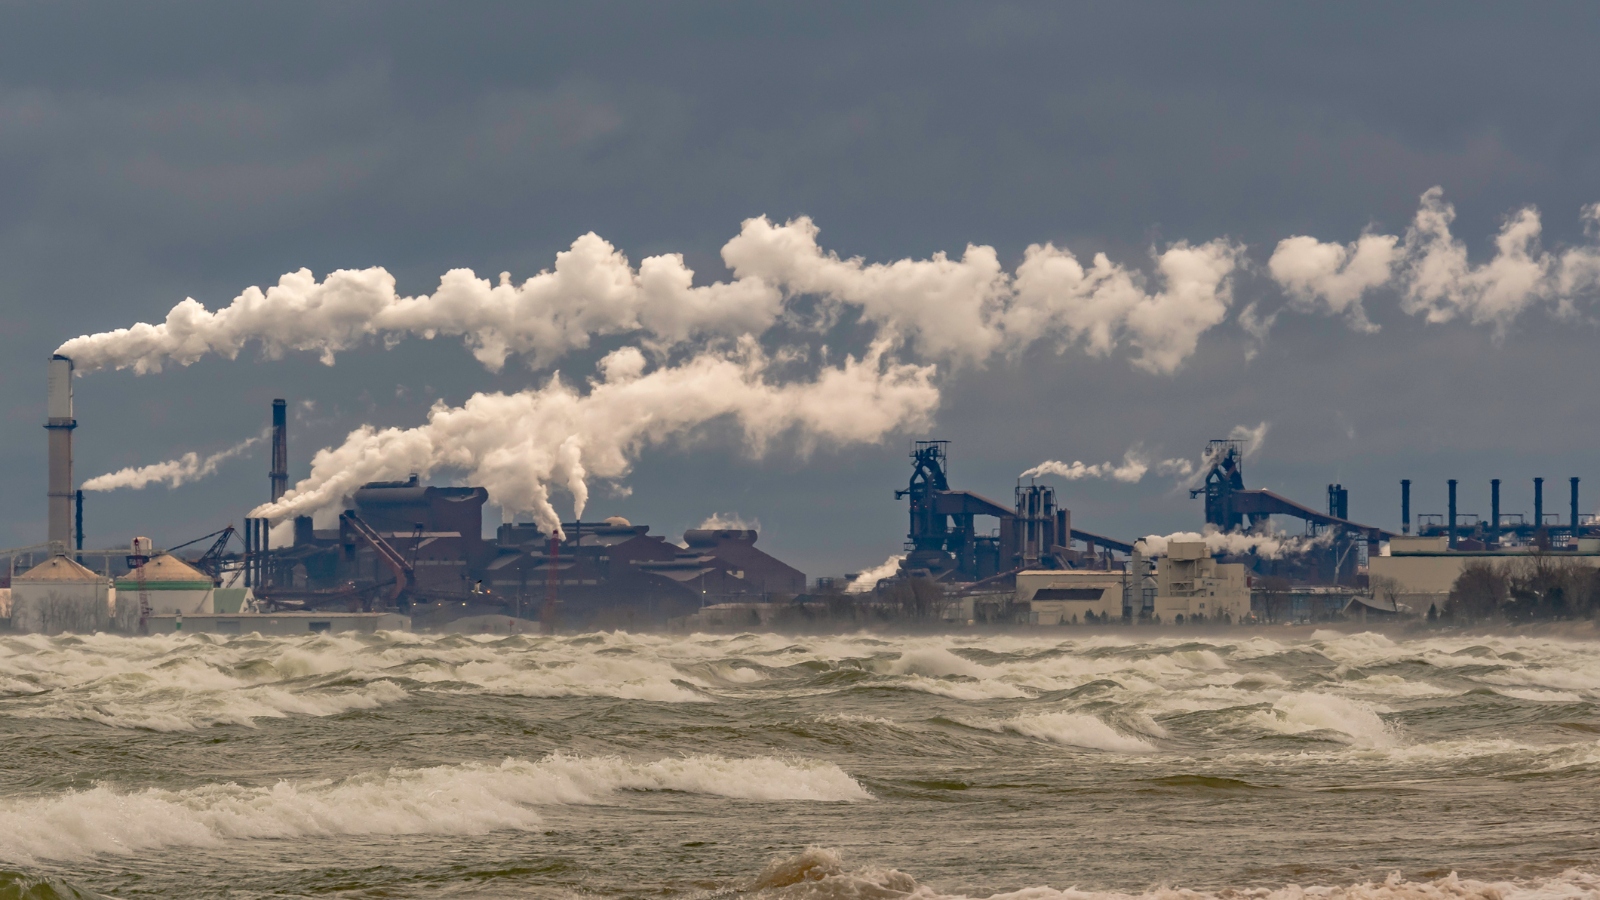 Steel mills along a lake on a stormy day